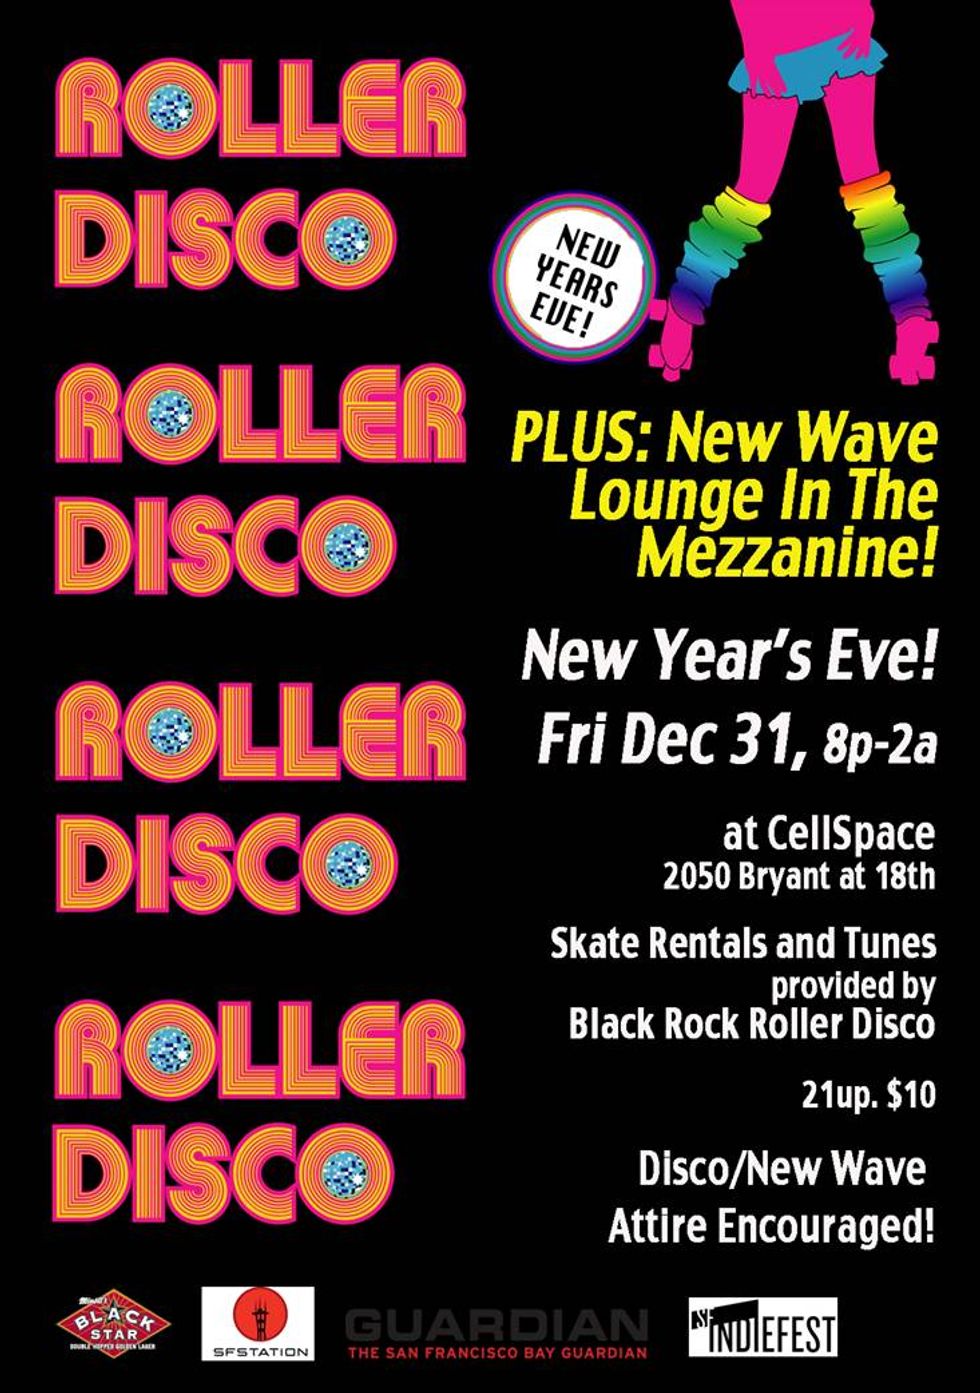 Roller Disco Fever Grips the Mission this New Year's Eve at CELLspace